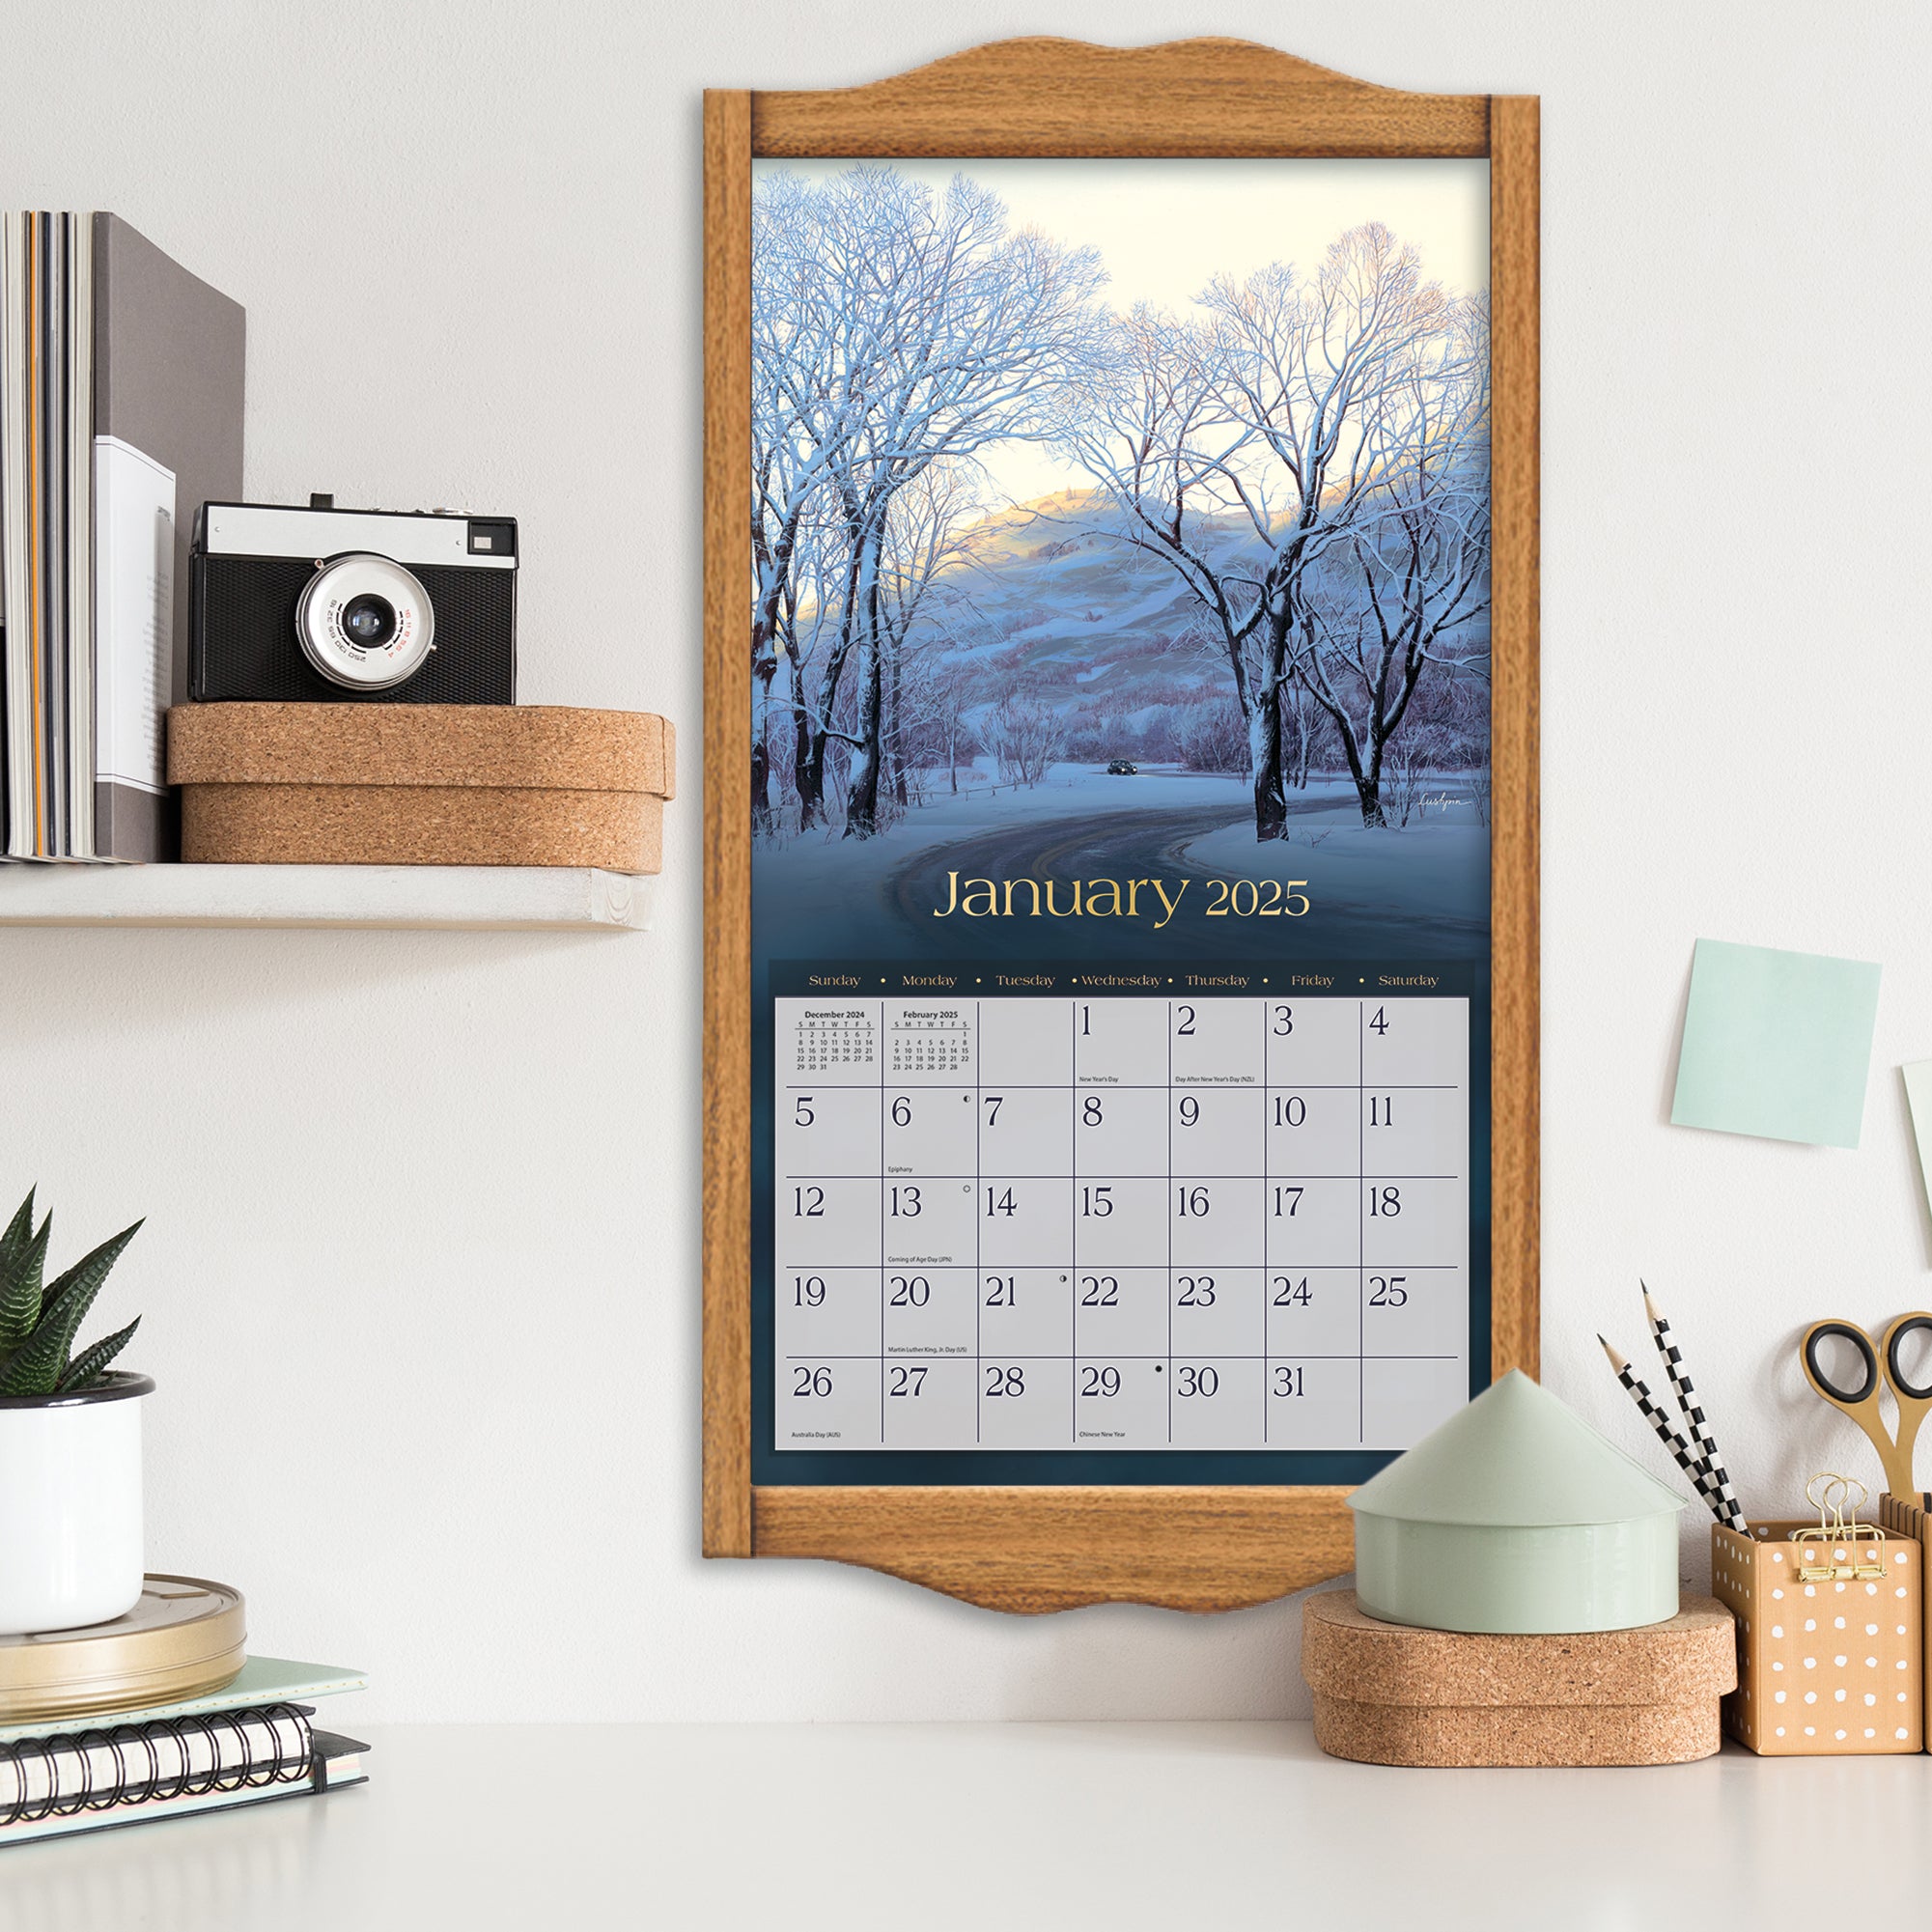 2025 Around The World By Evgeny Lushpin - LANG Deluxe Wall Calendar